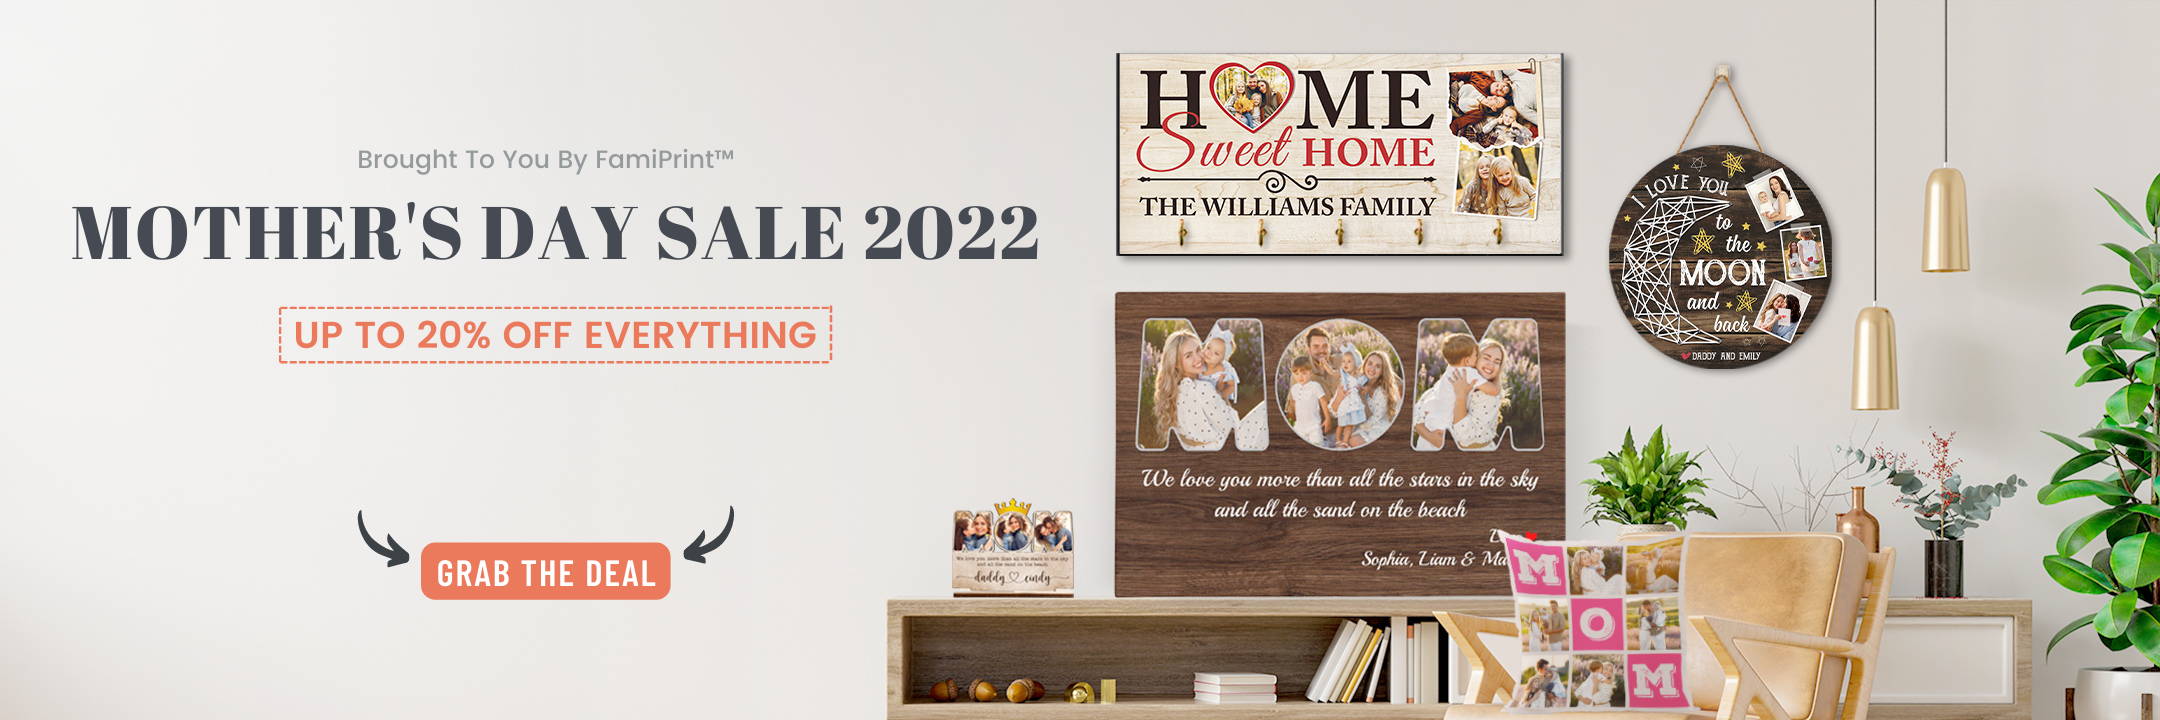 Mothers Day Sales and Deals 2022 | Famiprints